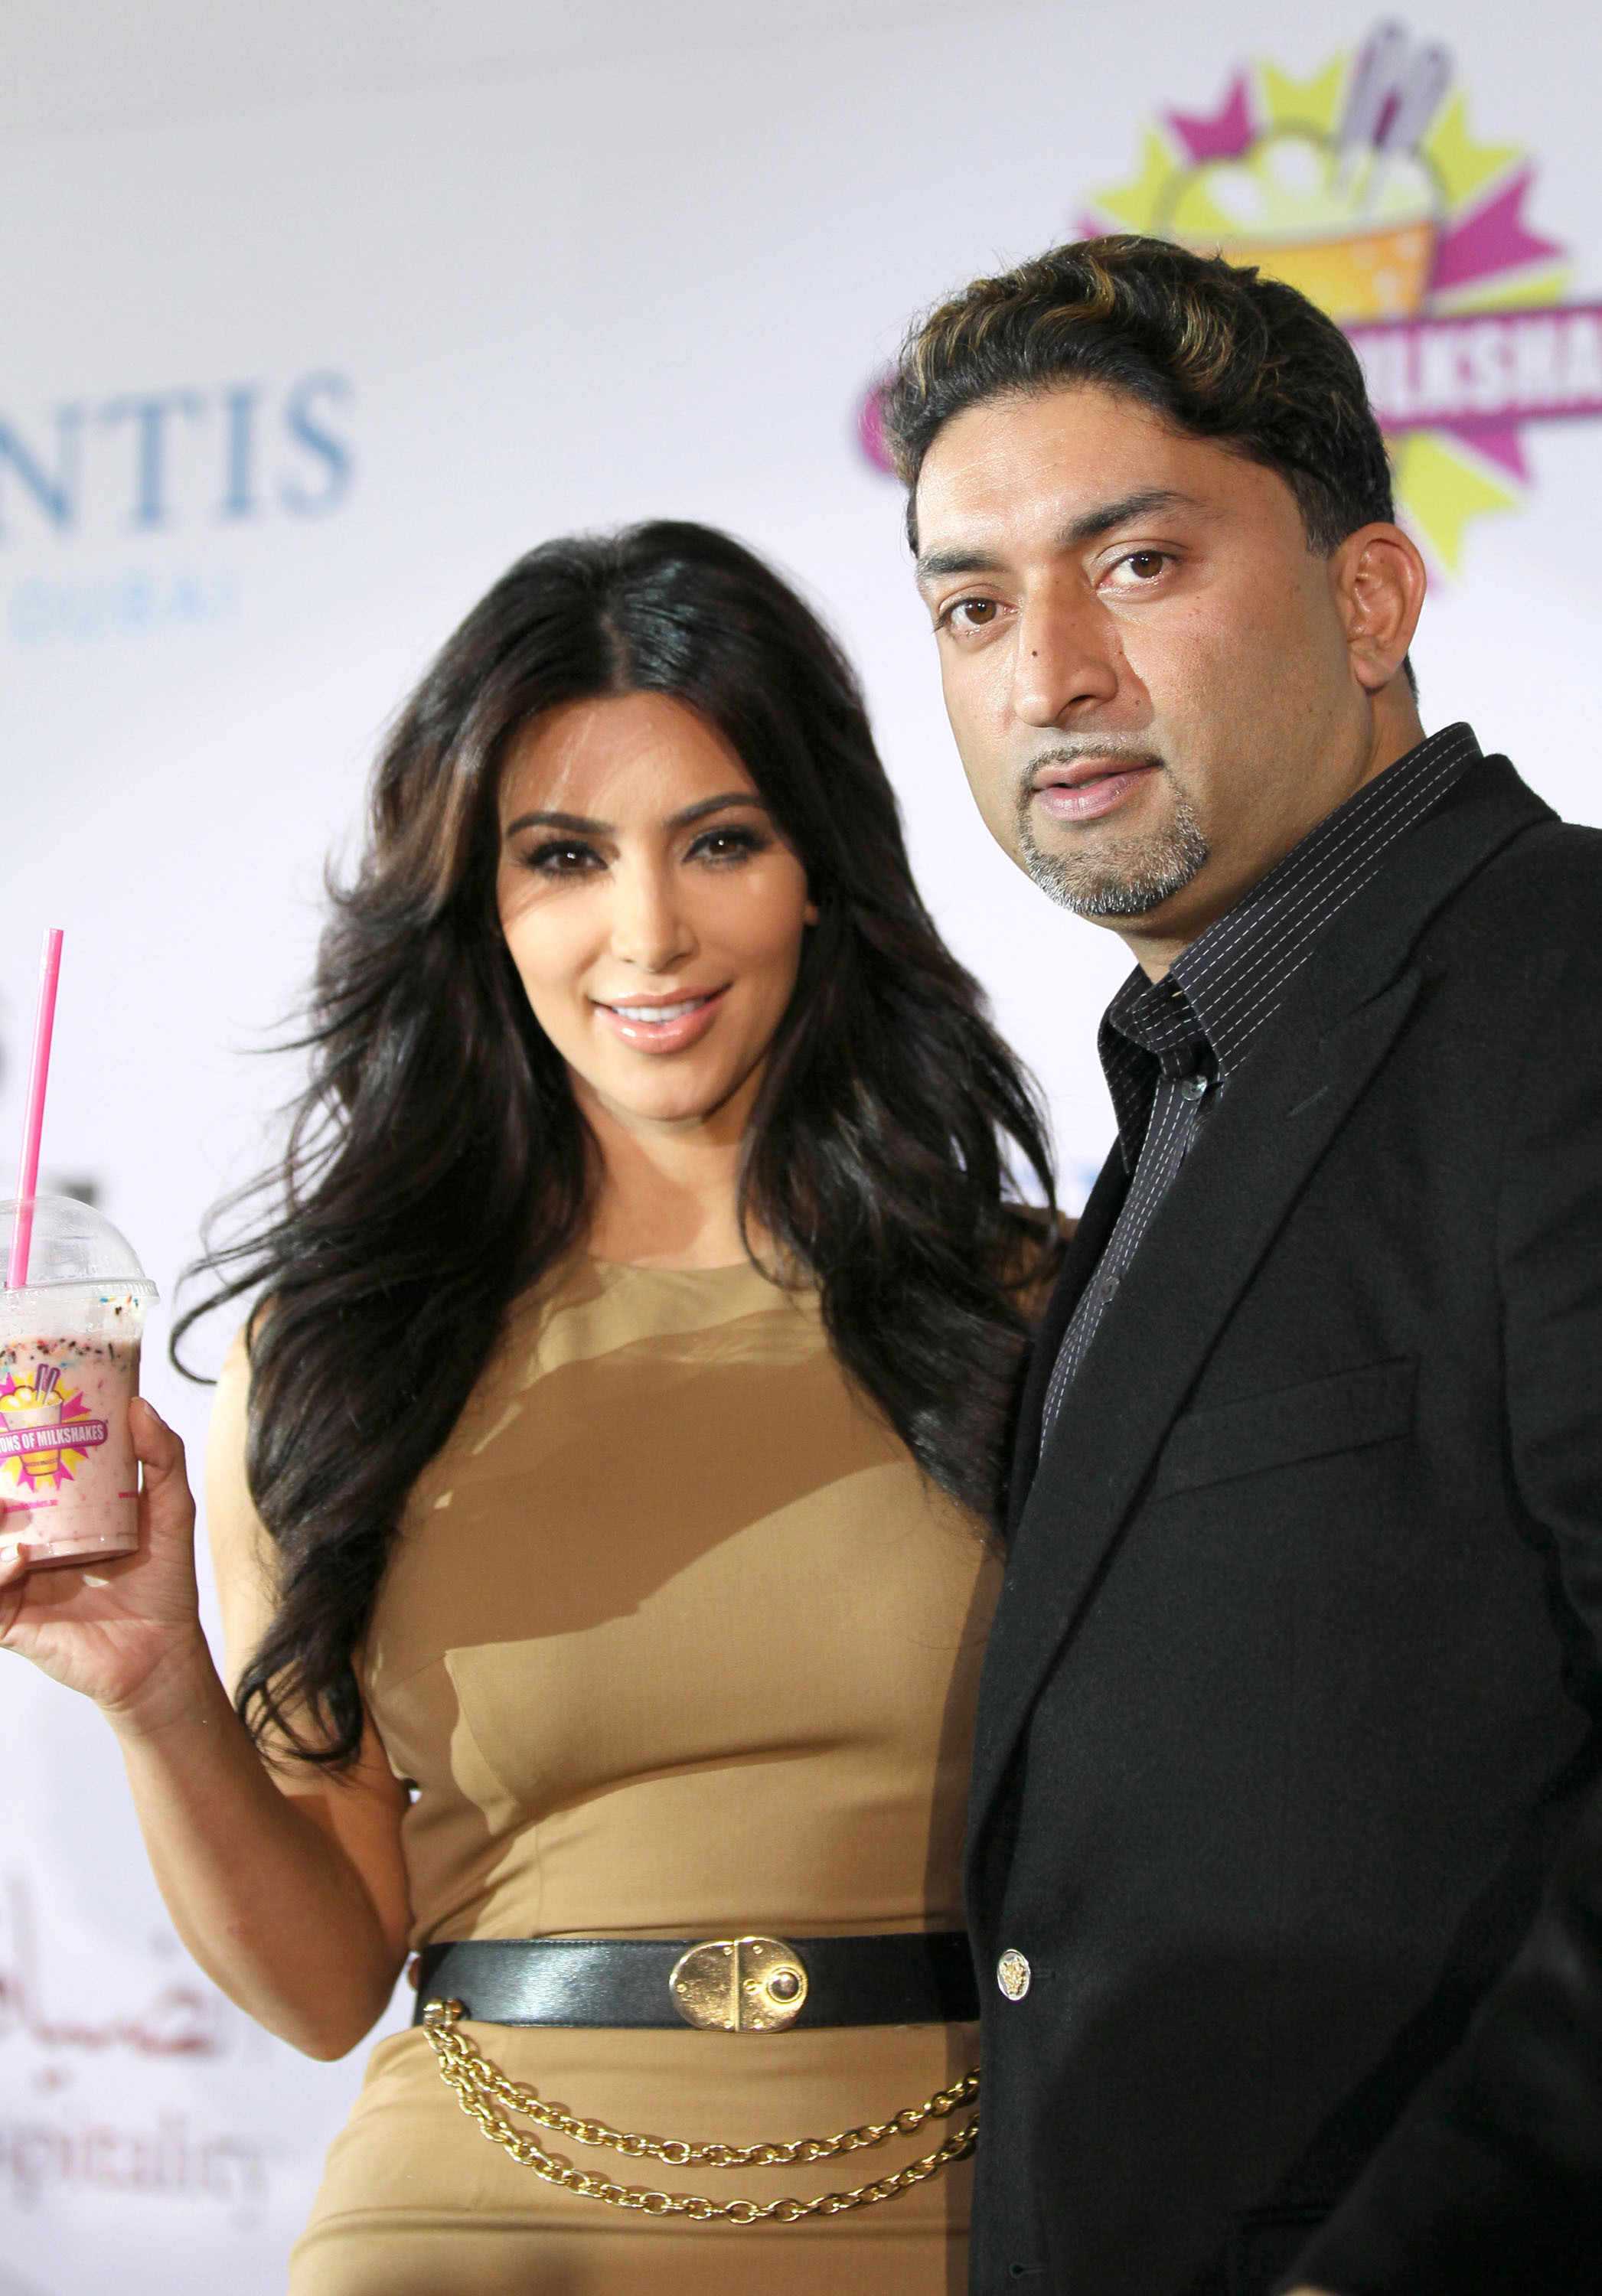 Kim Kardashian and Kris Jenner at the press conference for the launch of Millions Of Milkshakes | Picture 101683